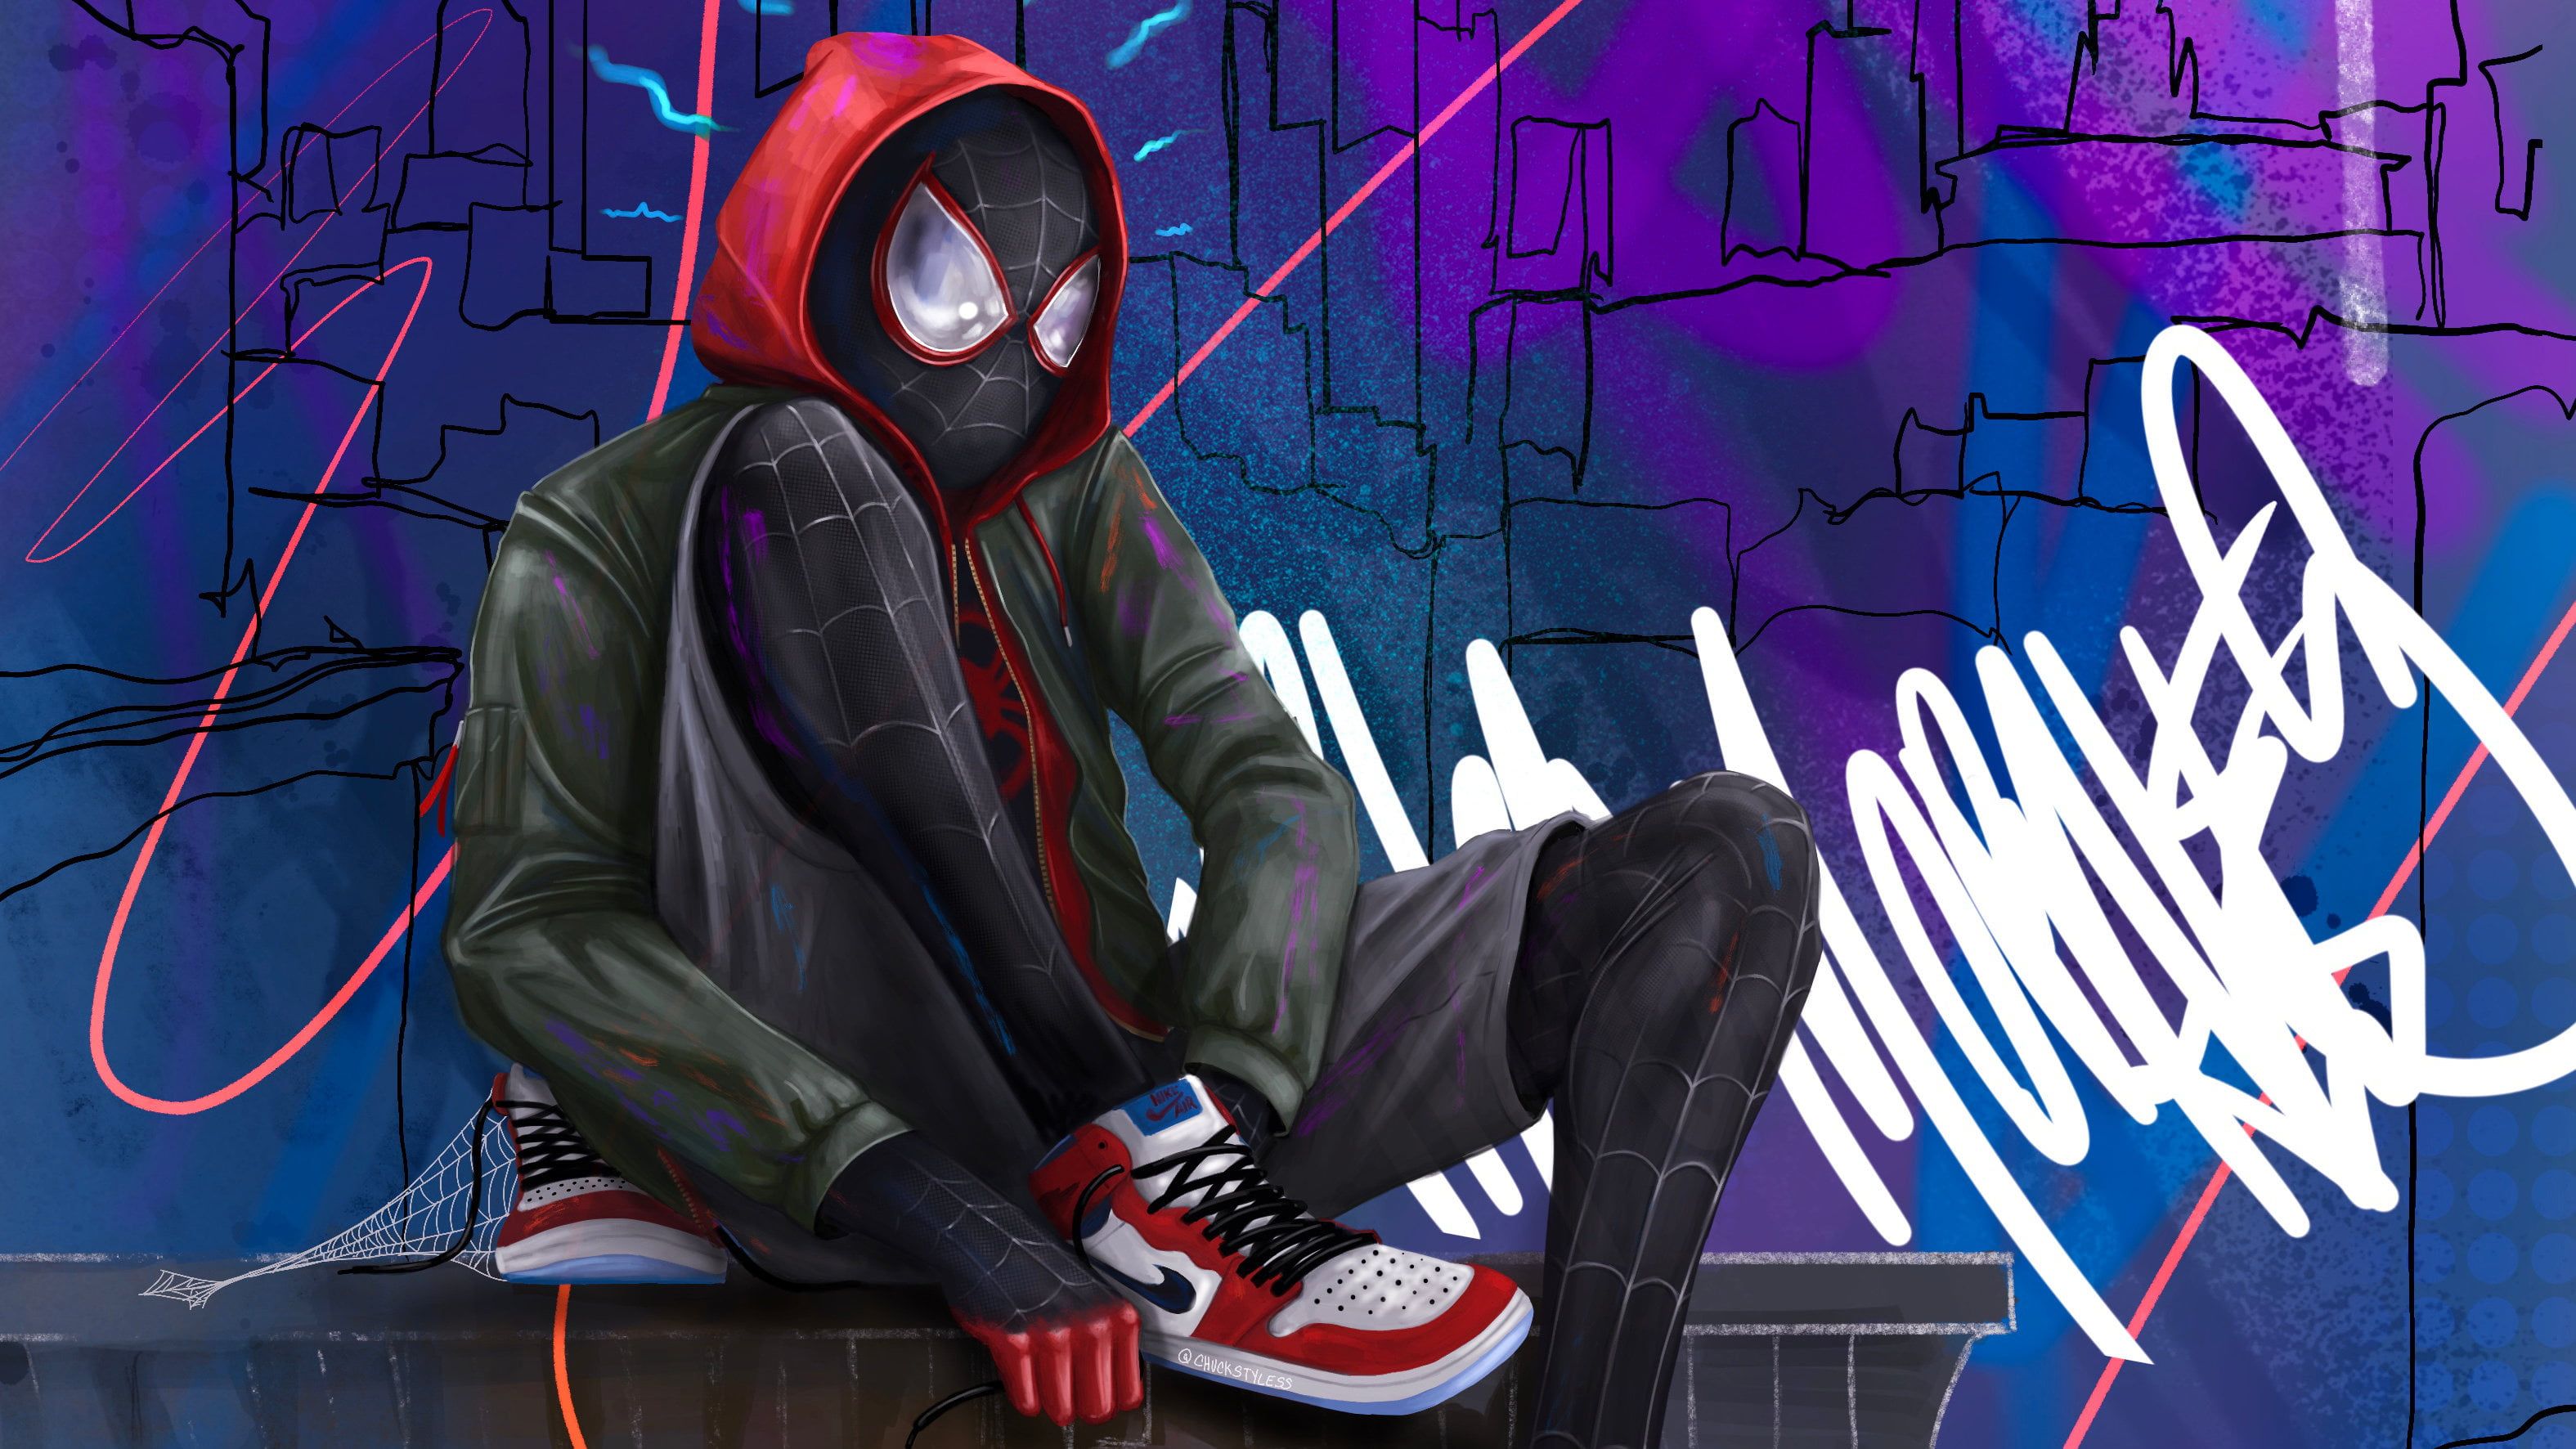 Movie Spider Man: Into The Spider Verse Marvel Comics Miles Morales #Spider Man K #wallpaper #hdwa. Marvel Wallpaper, Marvel Wallpaper Hd, 4k Wallpaper For Pc